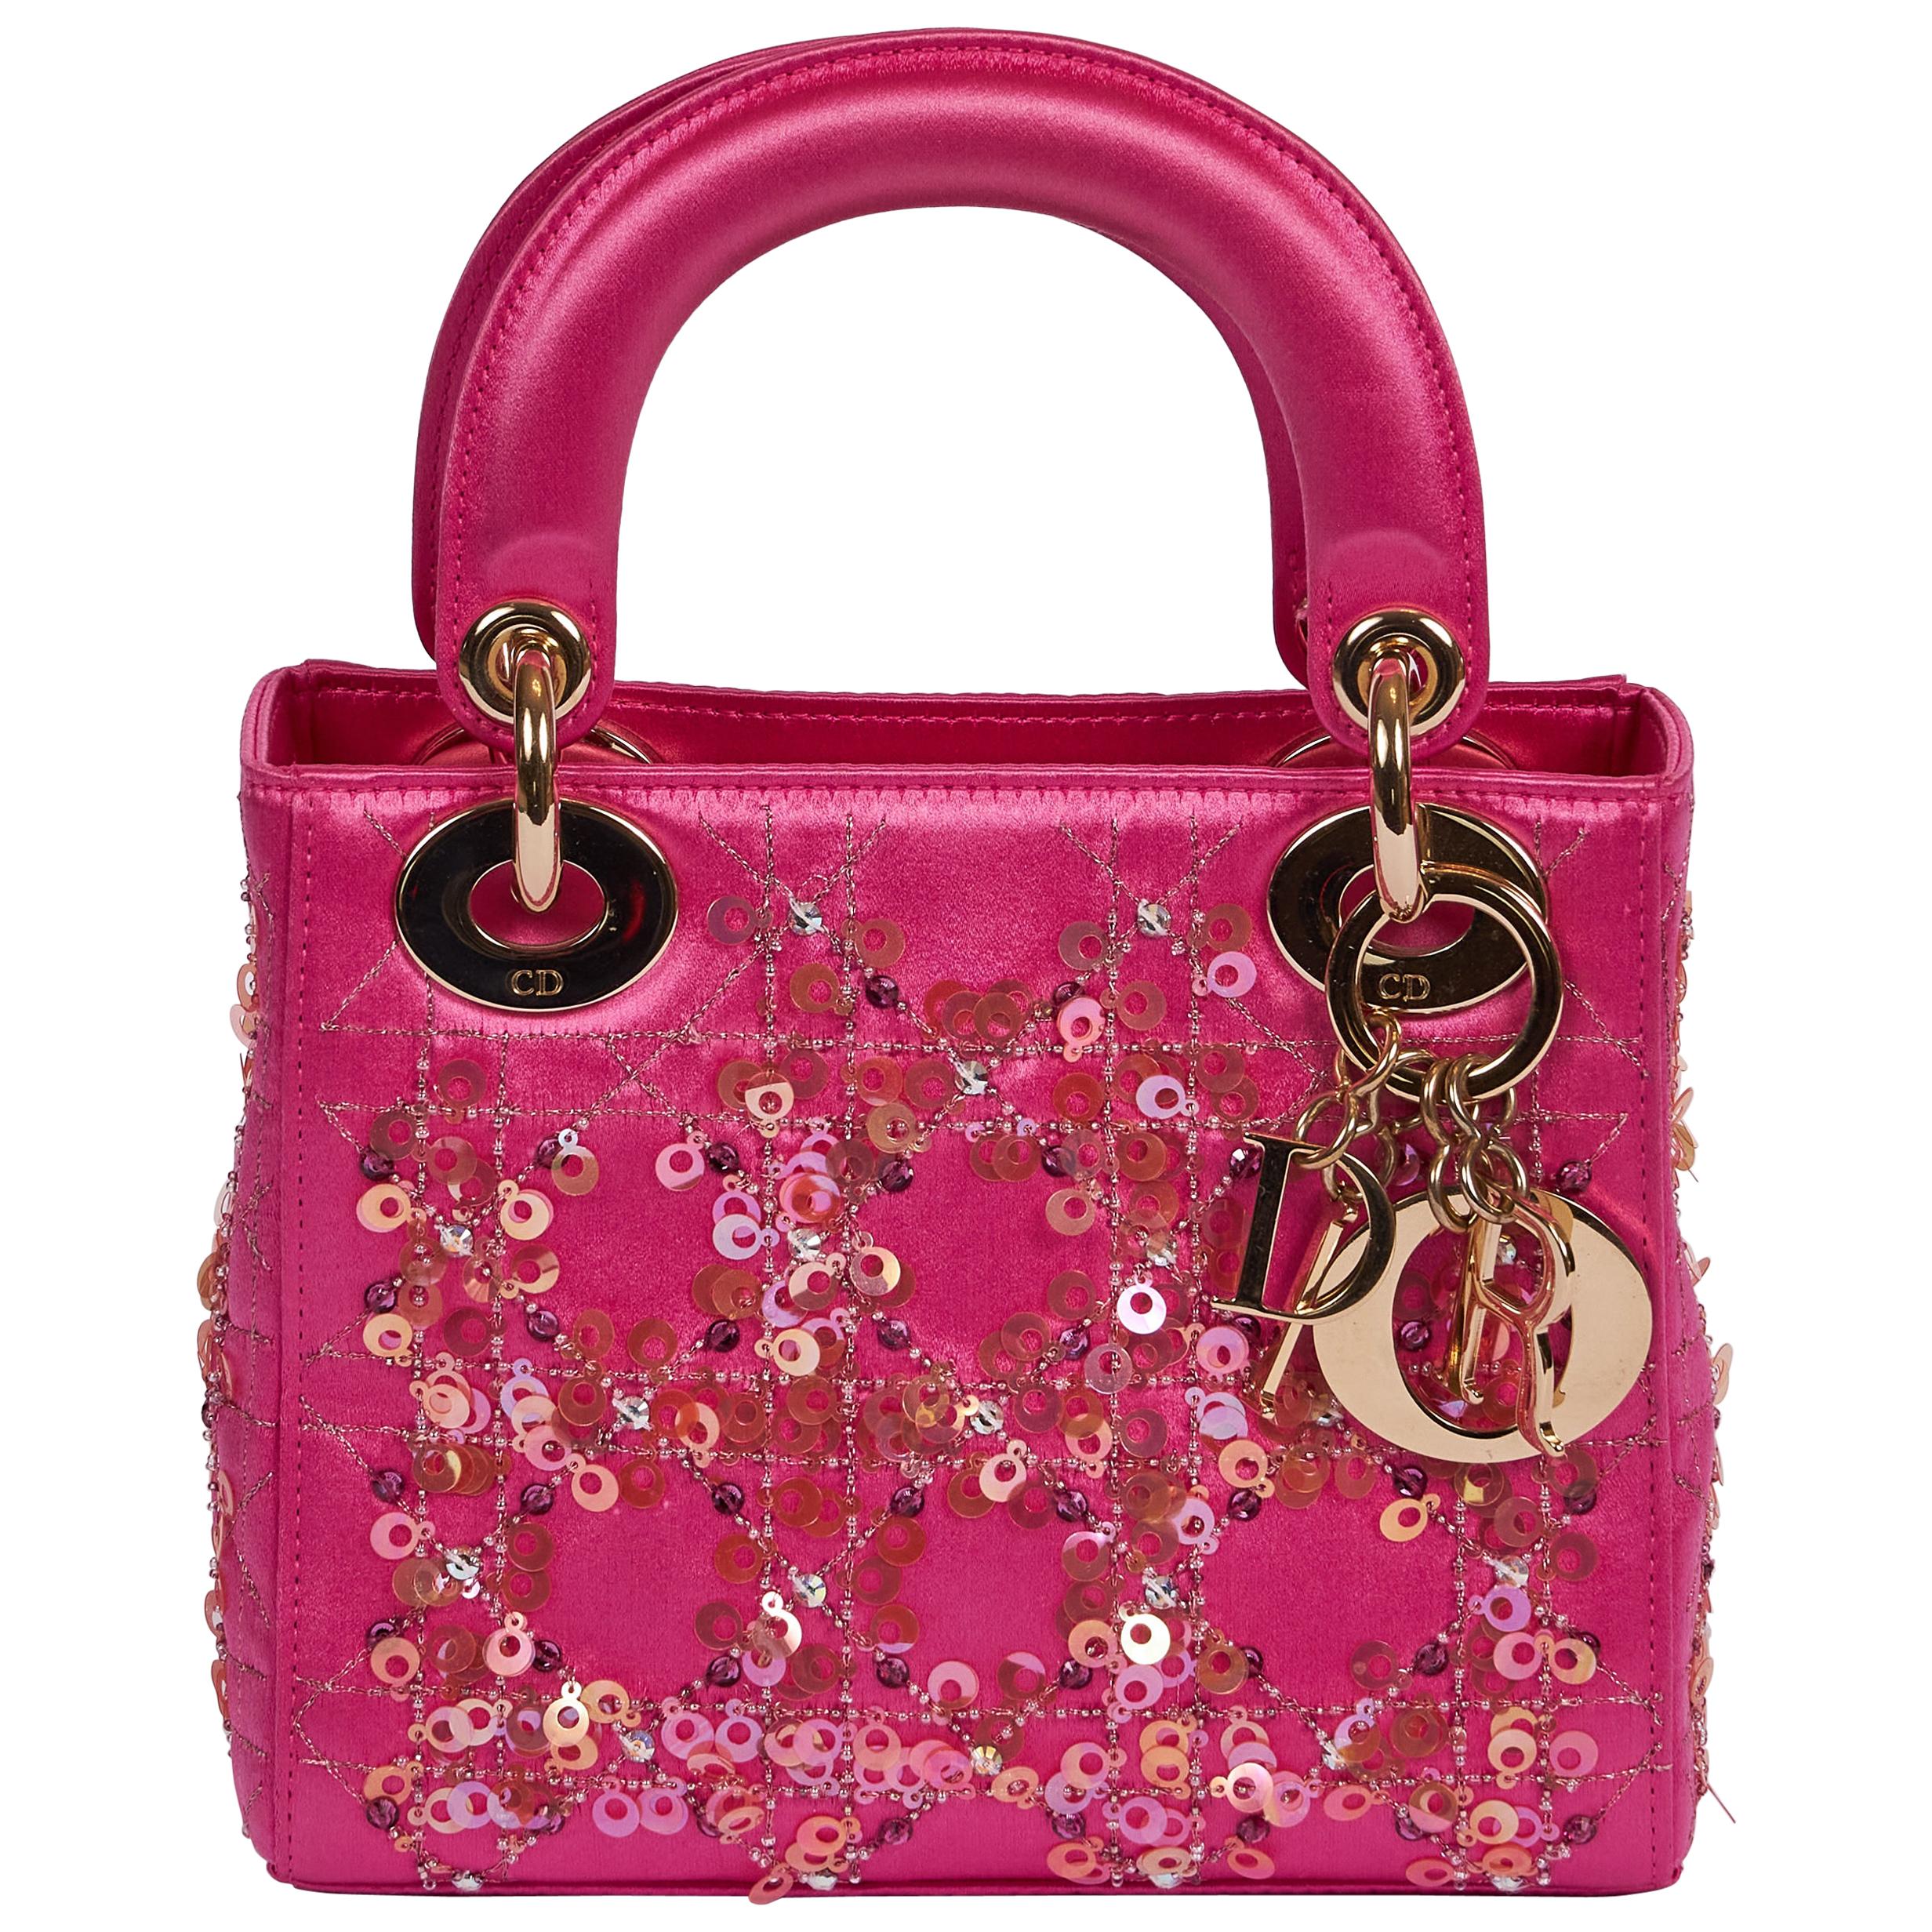 Mini Lady Dior Couture Hot Pink Sequin Bag